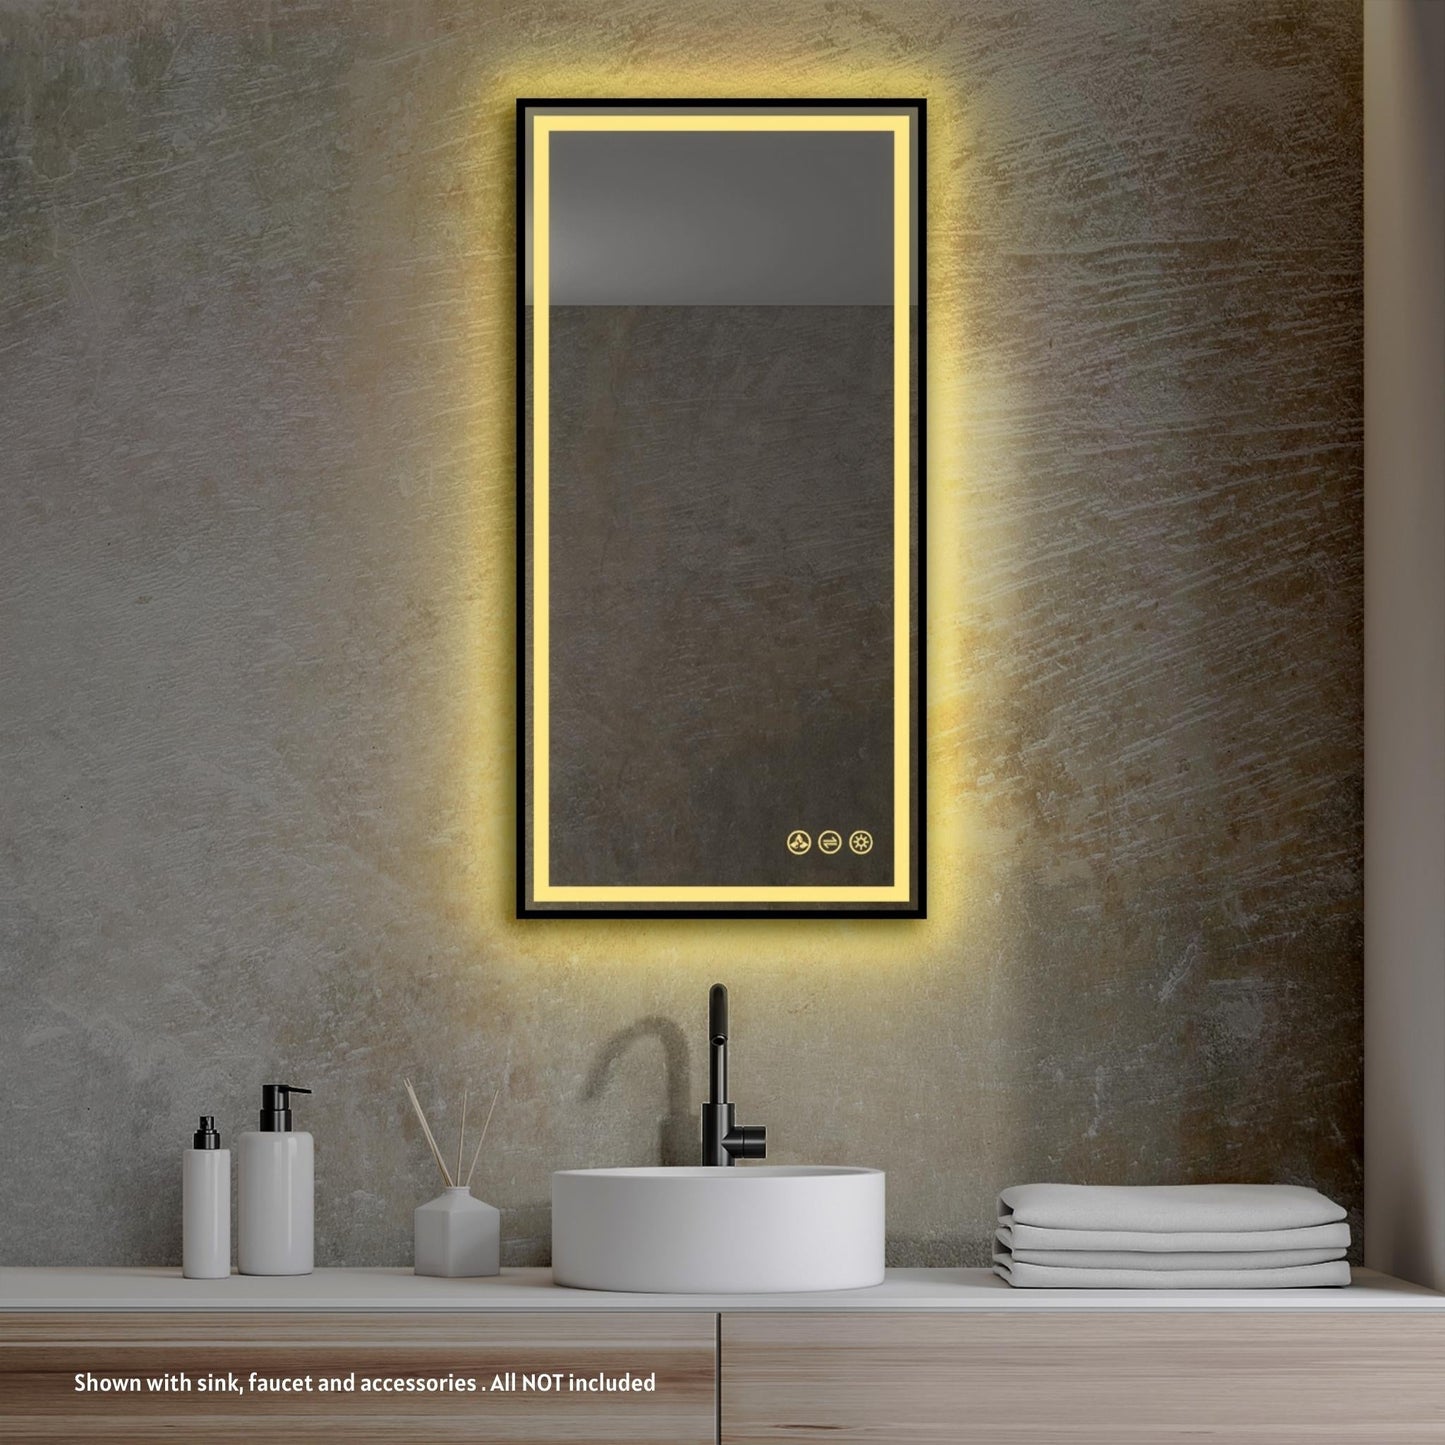 Blossom Stellar 18" x 36" Matte Black Hardwired Wall-Mounted Rectangle LED Mirror